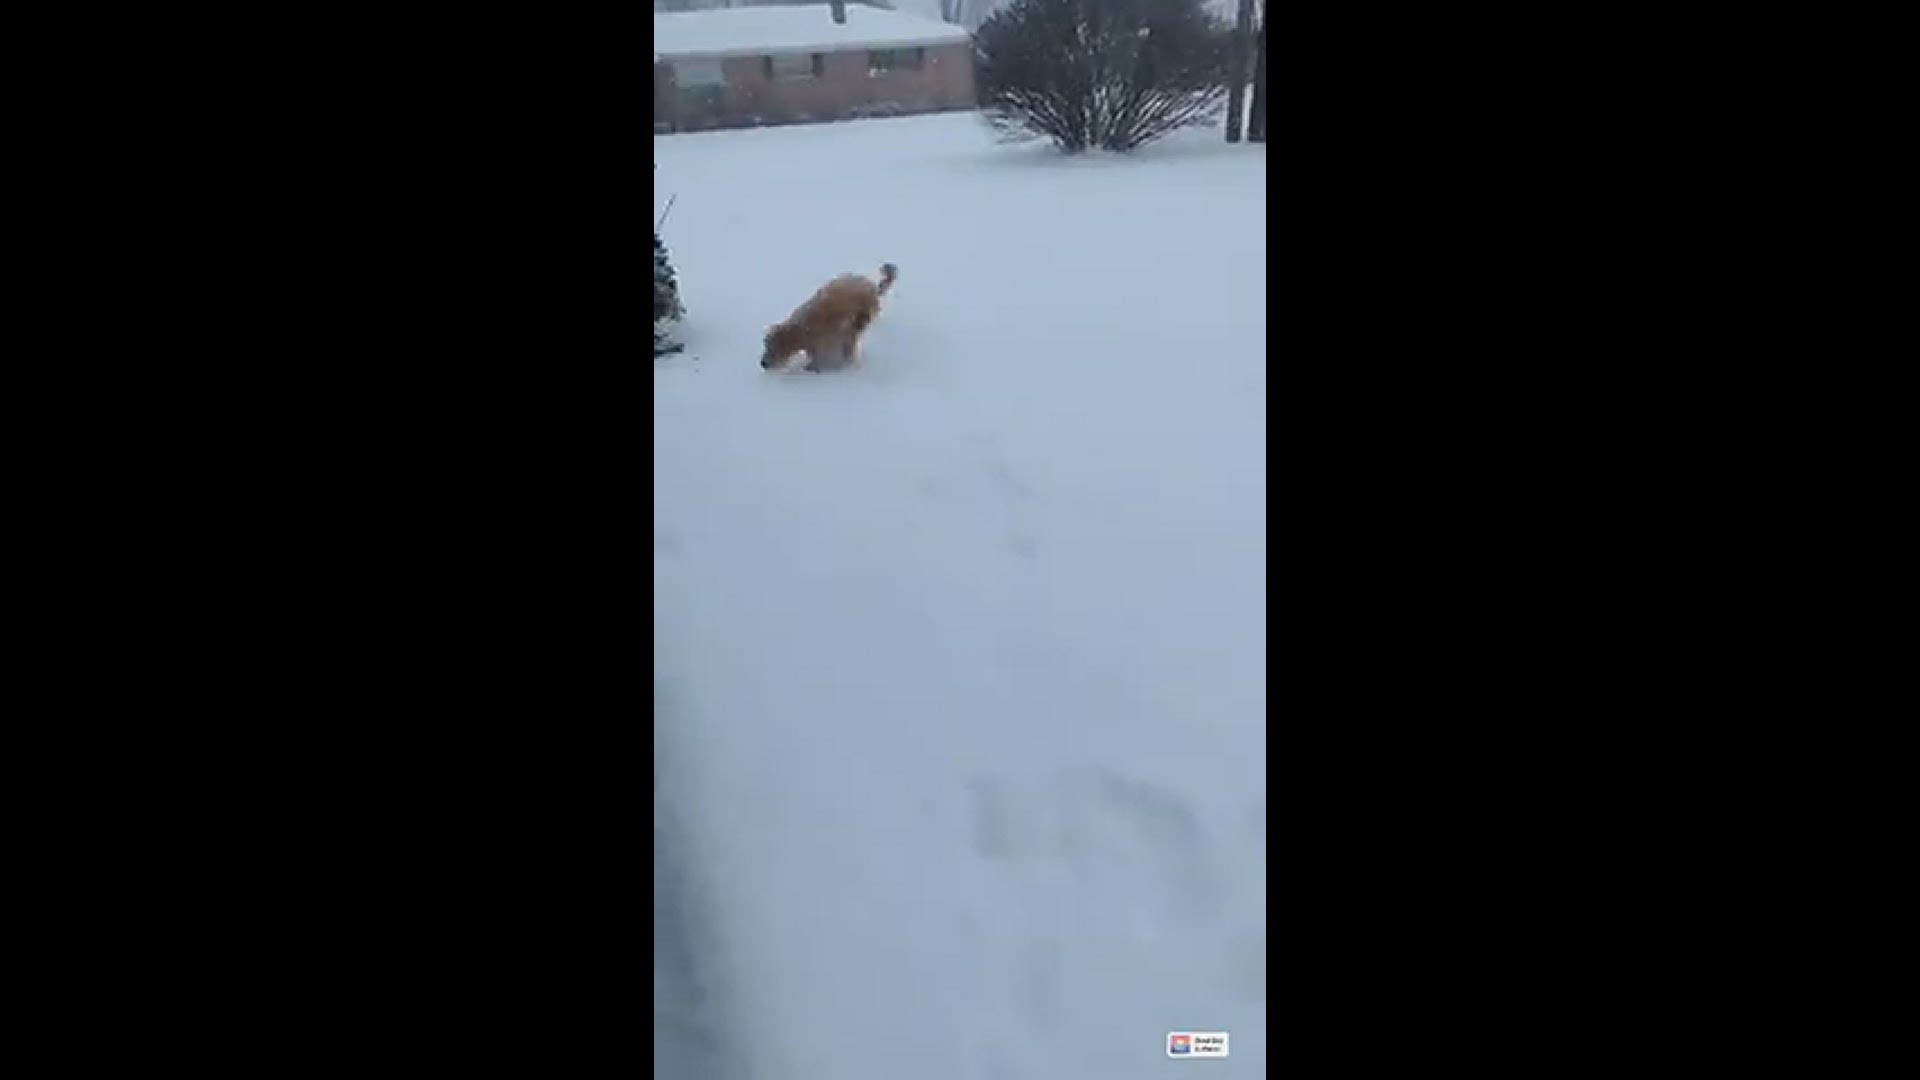 My 7 month olds goldendoodle loved playing in the snow for the first time!
Credit: Cameron Thomas